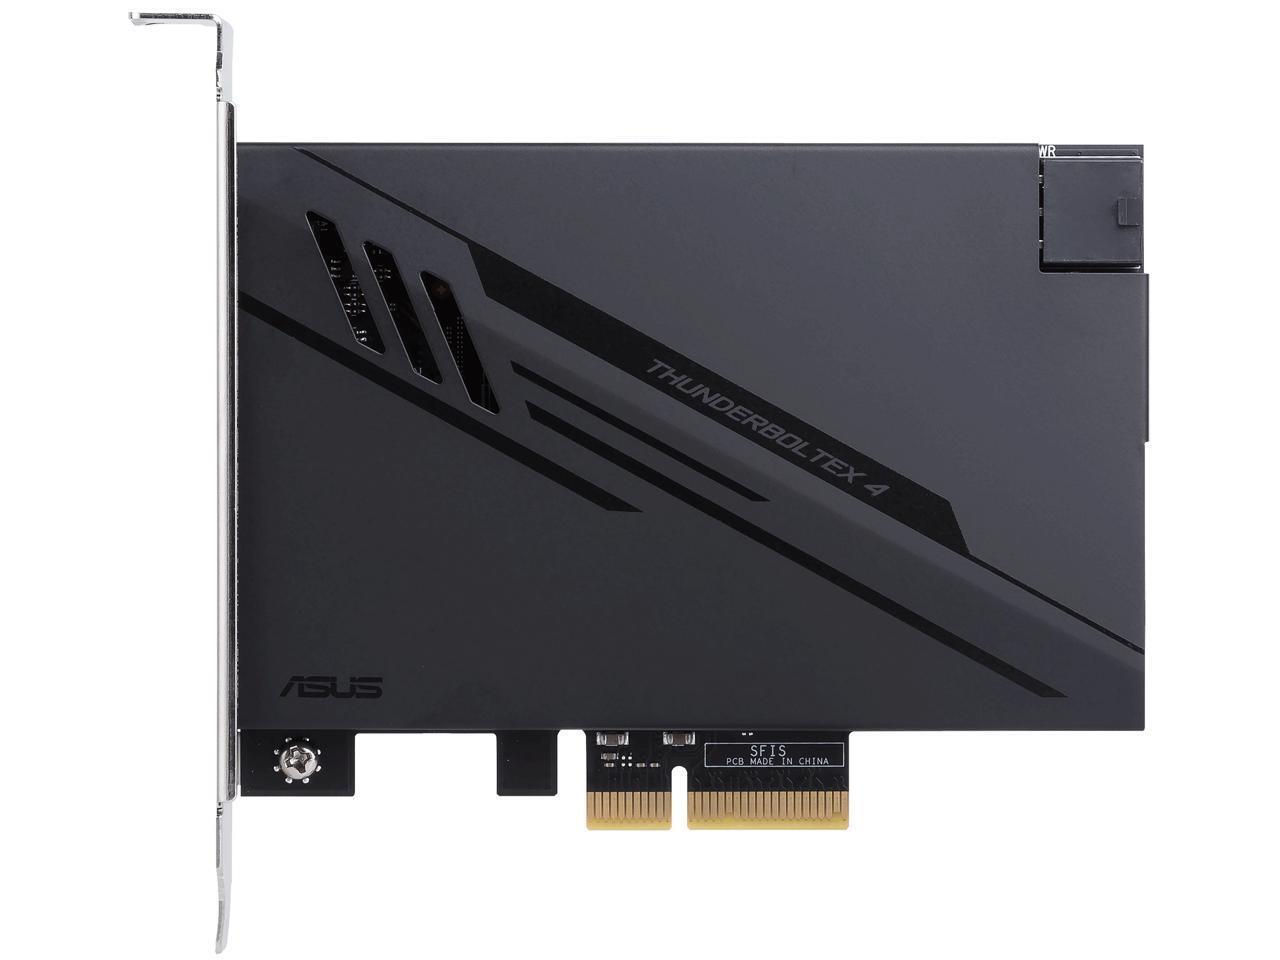 ASUS ThunderboltEX 4 with Intel Thunderbolt 4 JHL 8540 Controller, 2 USB Type-C